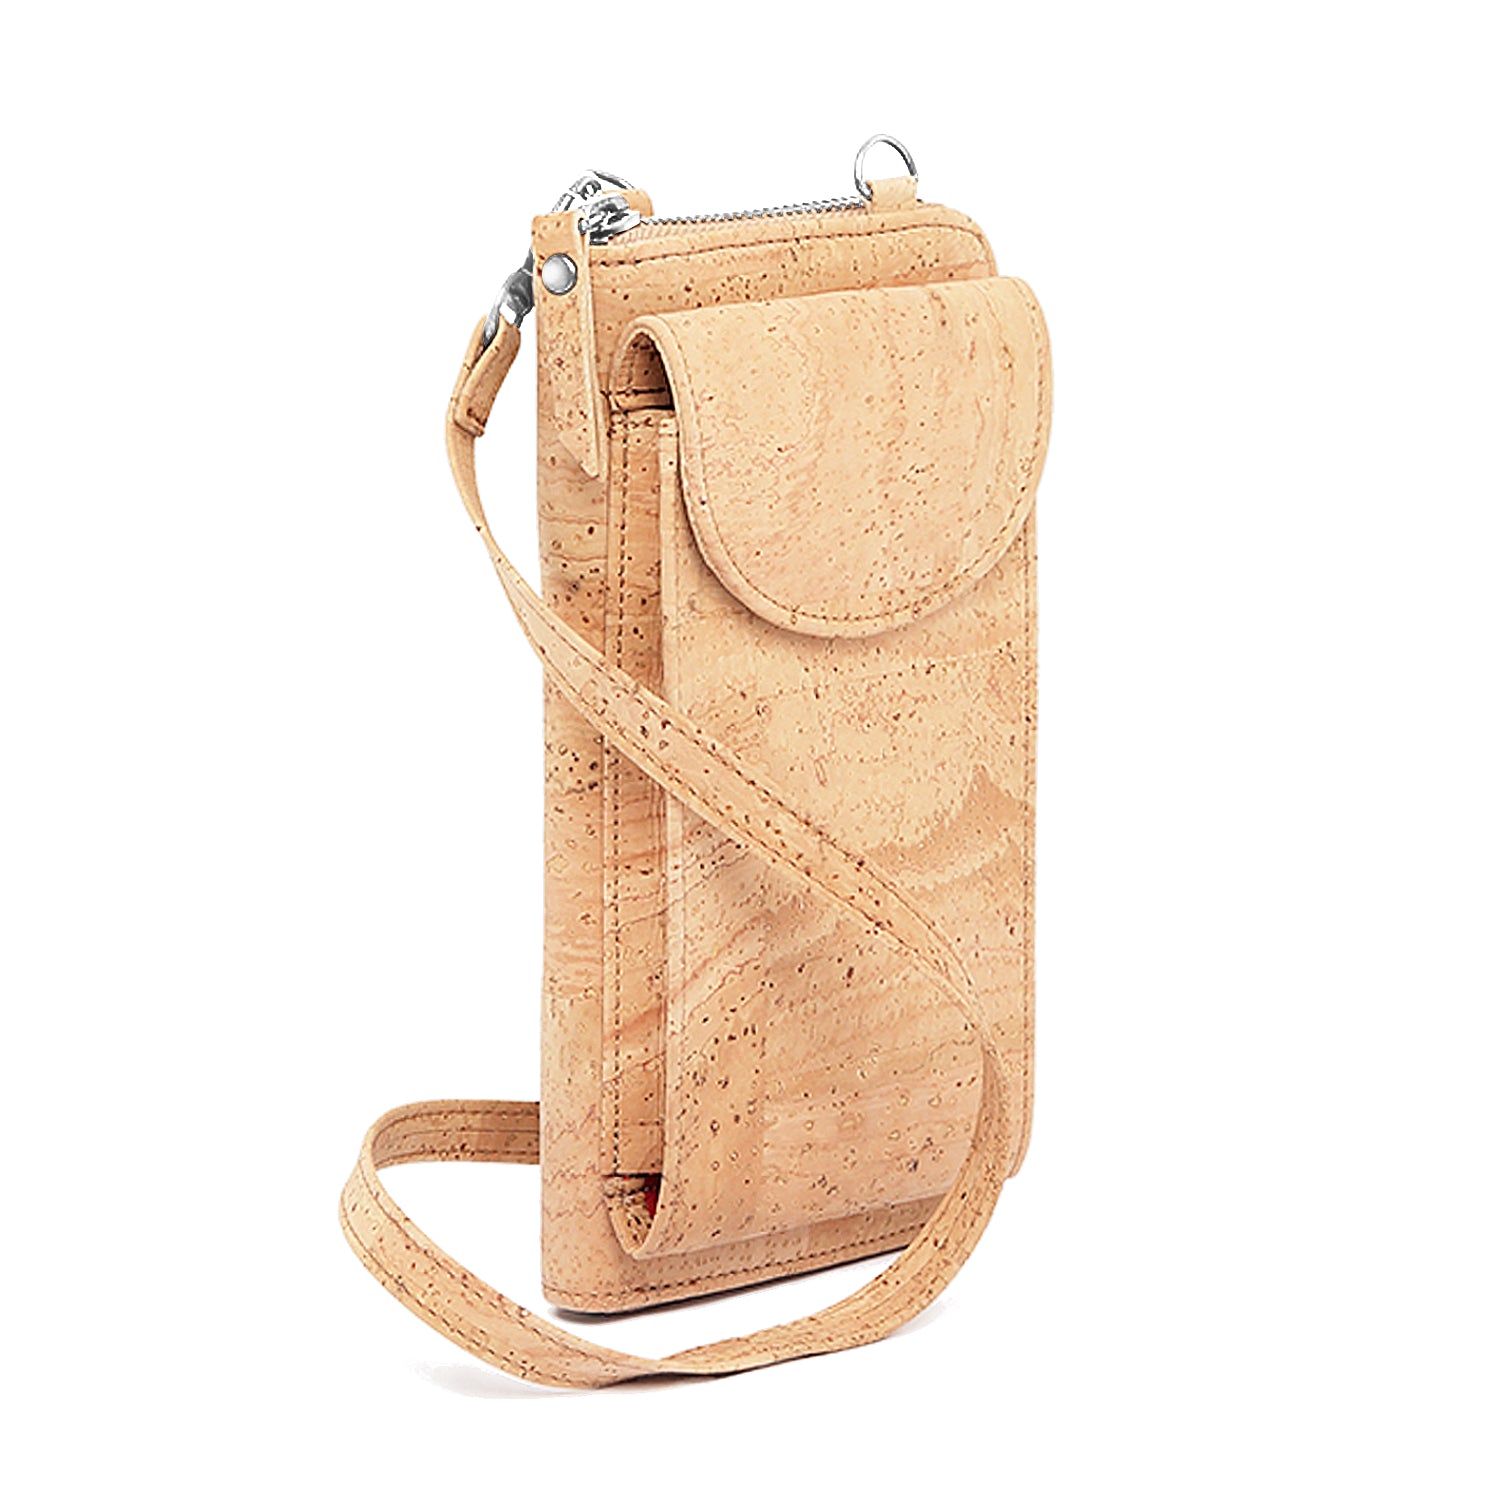 Cork Phone Wallet Bag - Cork and Company | Made in Portugal | Vegan Eco-Friendly Fashion